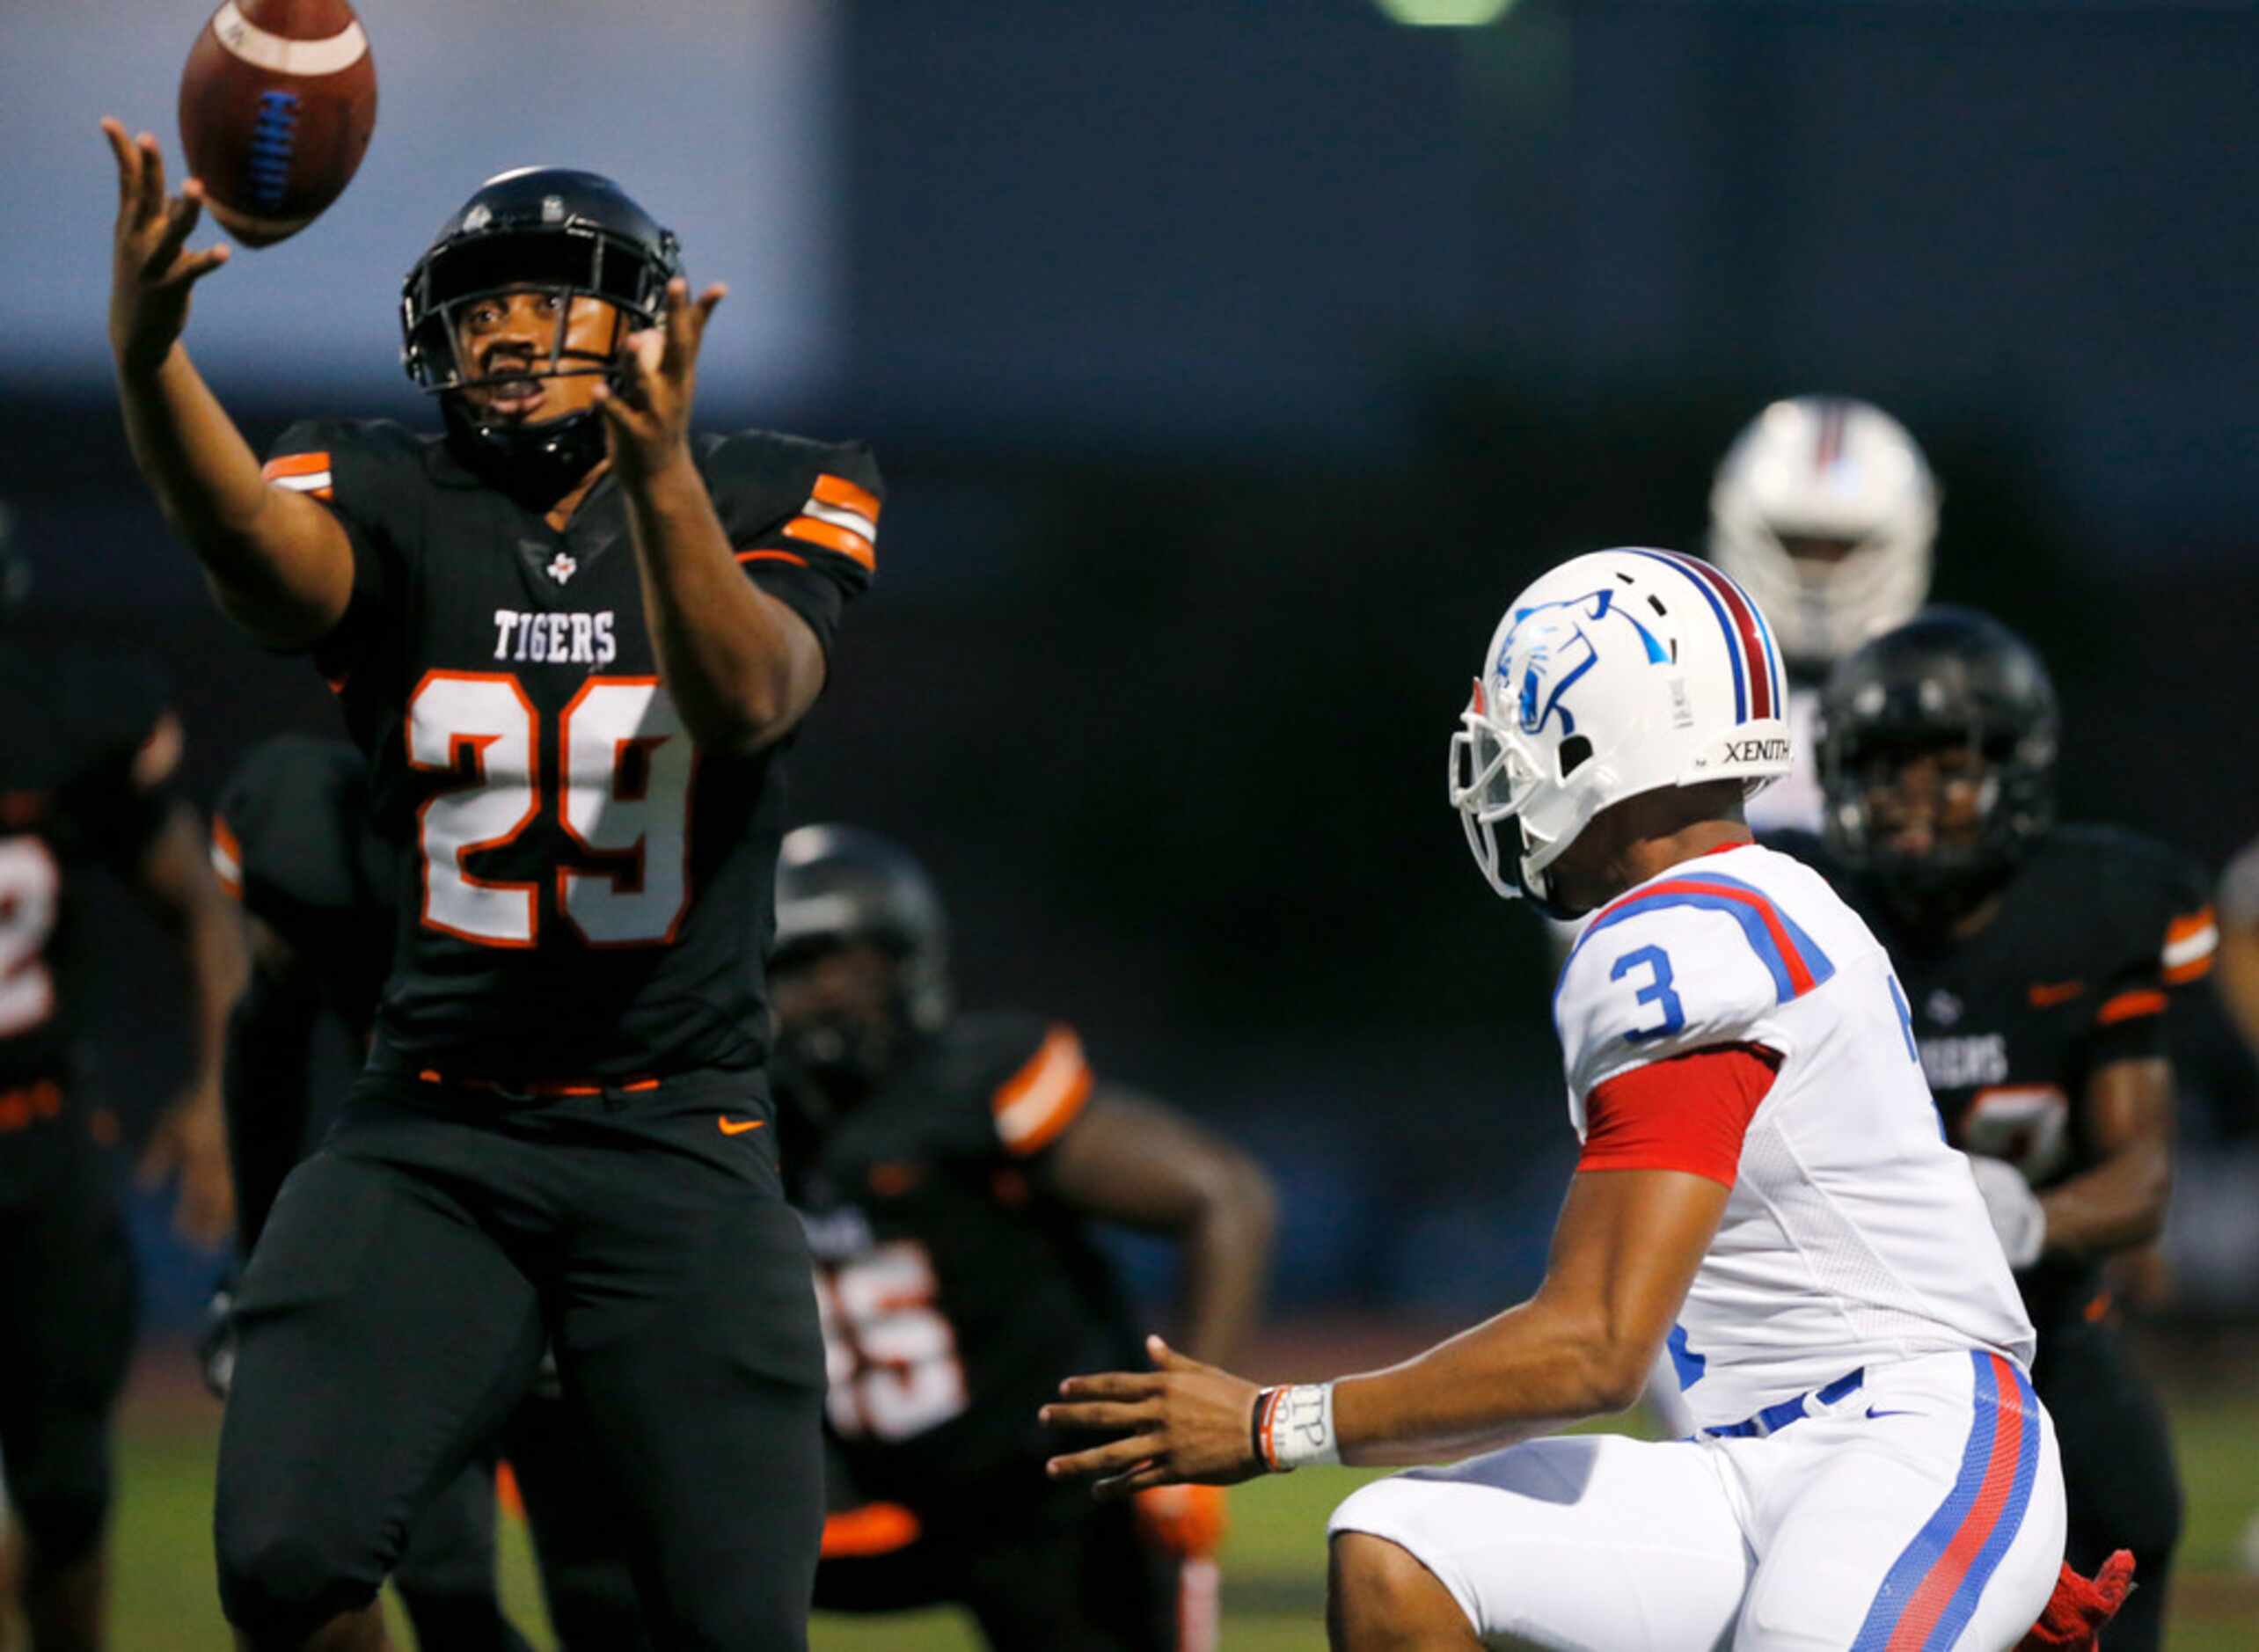 Duncanville quarterback Ja'Quinden Jackson (3) lost the grip on the ball turning it over to...